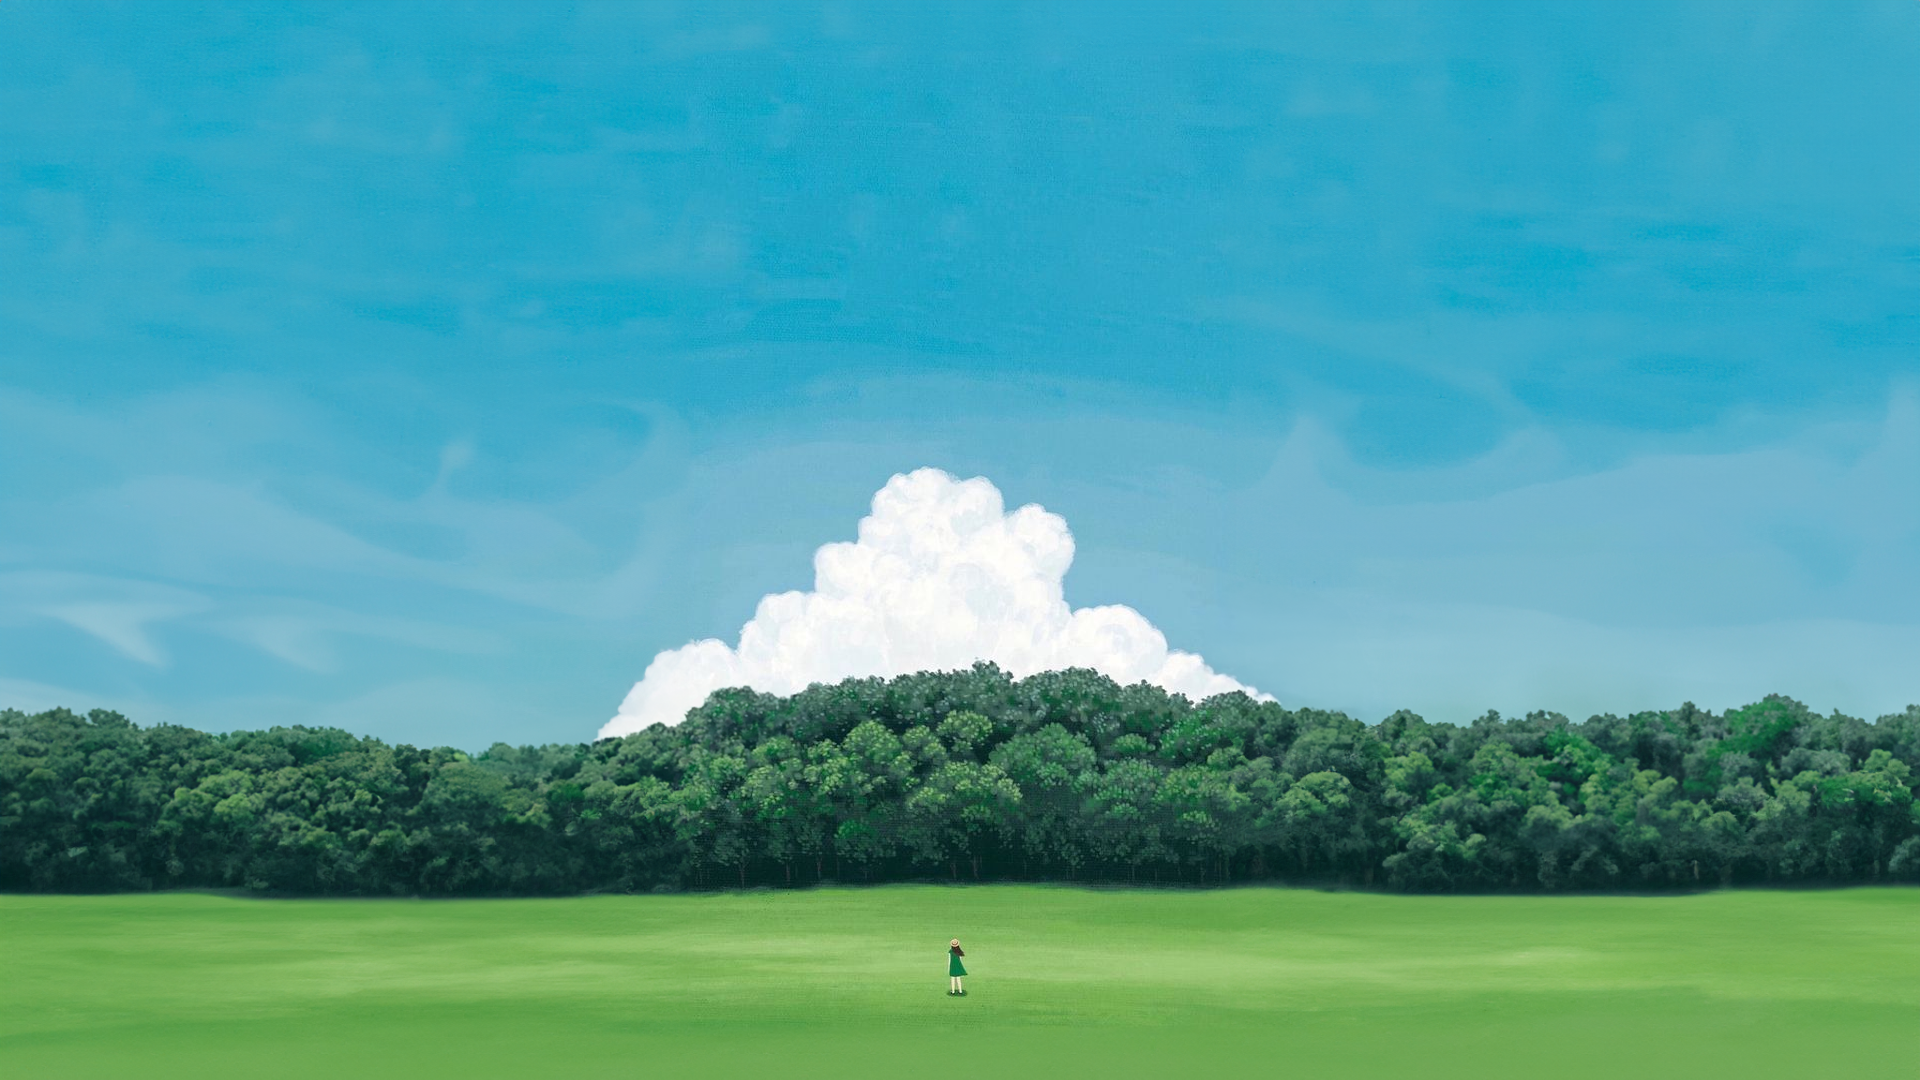 Ground Grass Clouds Minimalism Simple Background Sky Hat Forest Trees 1920x1080